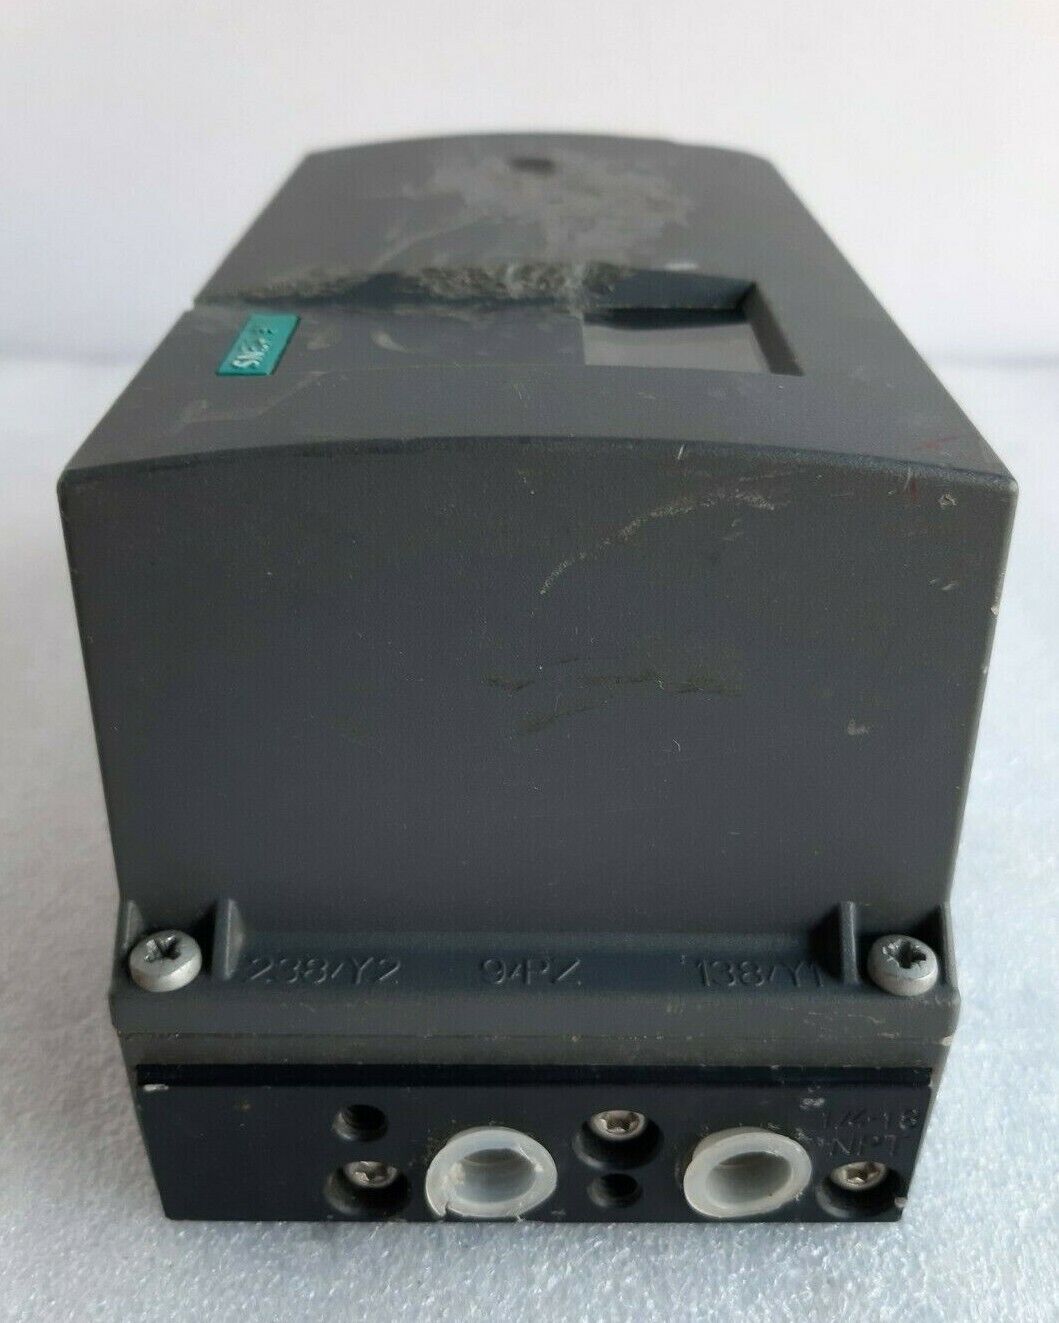 SIEMENS 6DR5110-0NN01-0AA0 SIPART PS2 POSITIONER